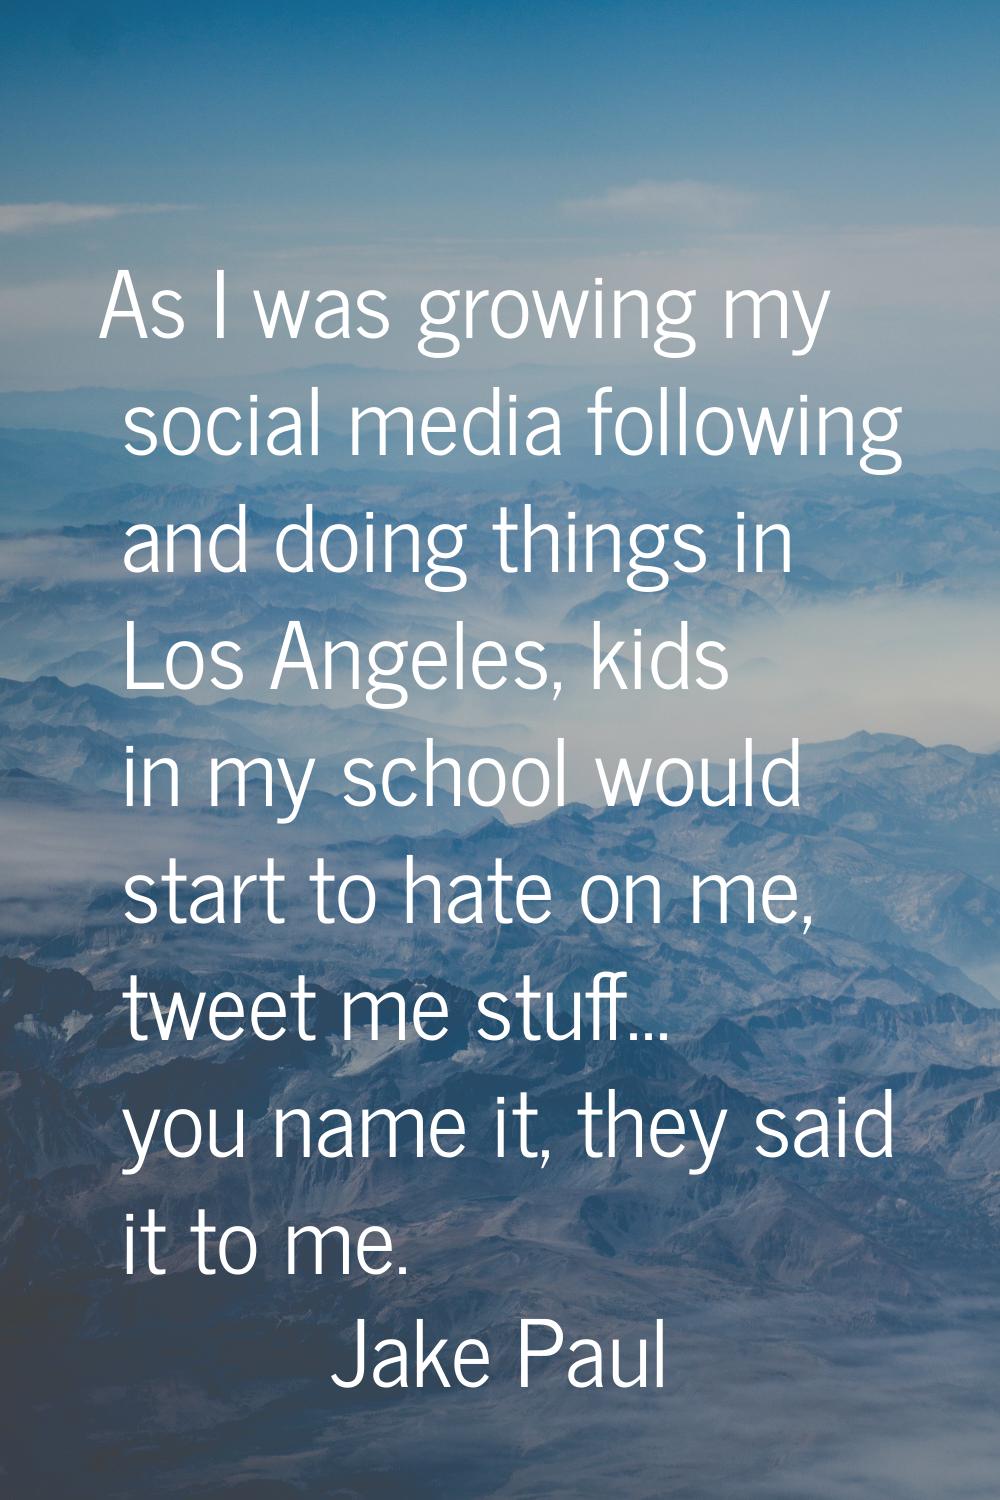 As I was growing my social media following and doing things in Los Angeles, kids in my school would